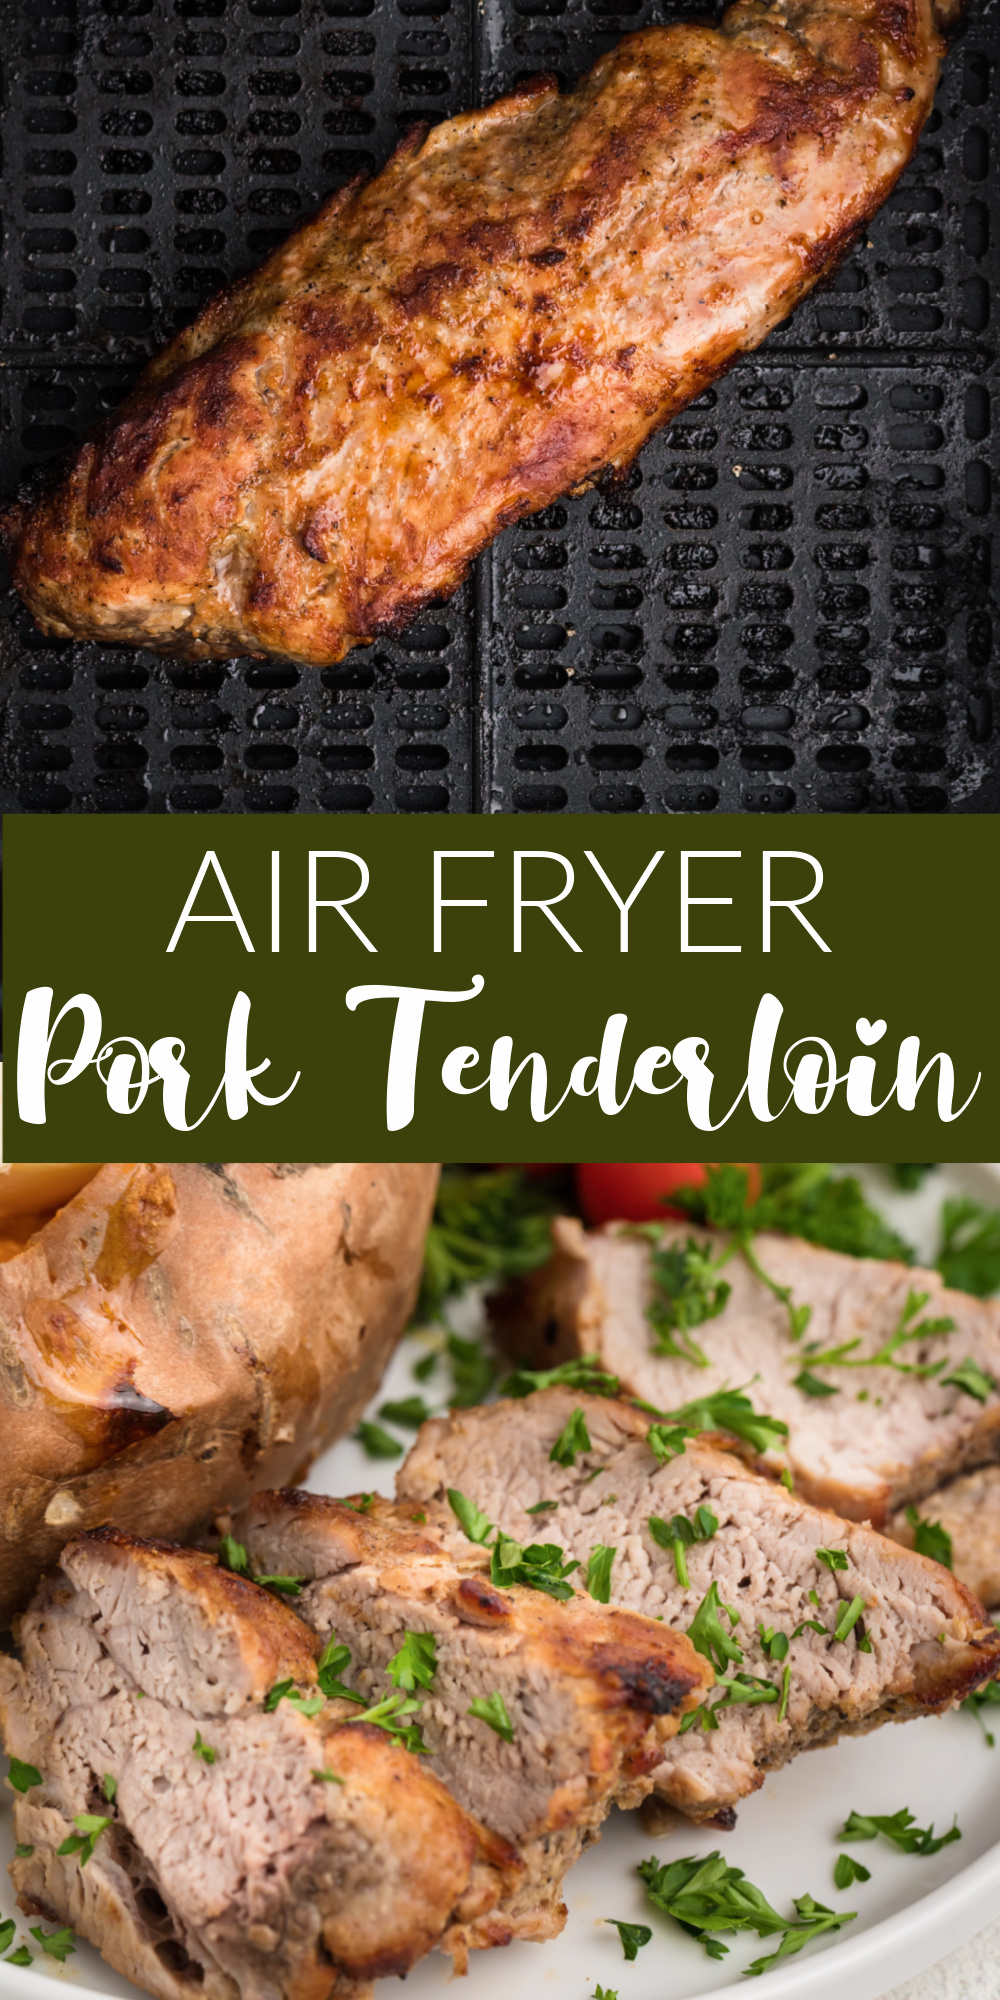 Air Fryer Pork Tenderloin is one of my favorite low carb dinner recipes. You can make this air fryer recipe from start to finish in just 20 minutes. You just need a handful of seasonings and a little olive oil for the easiest dinner, ever!